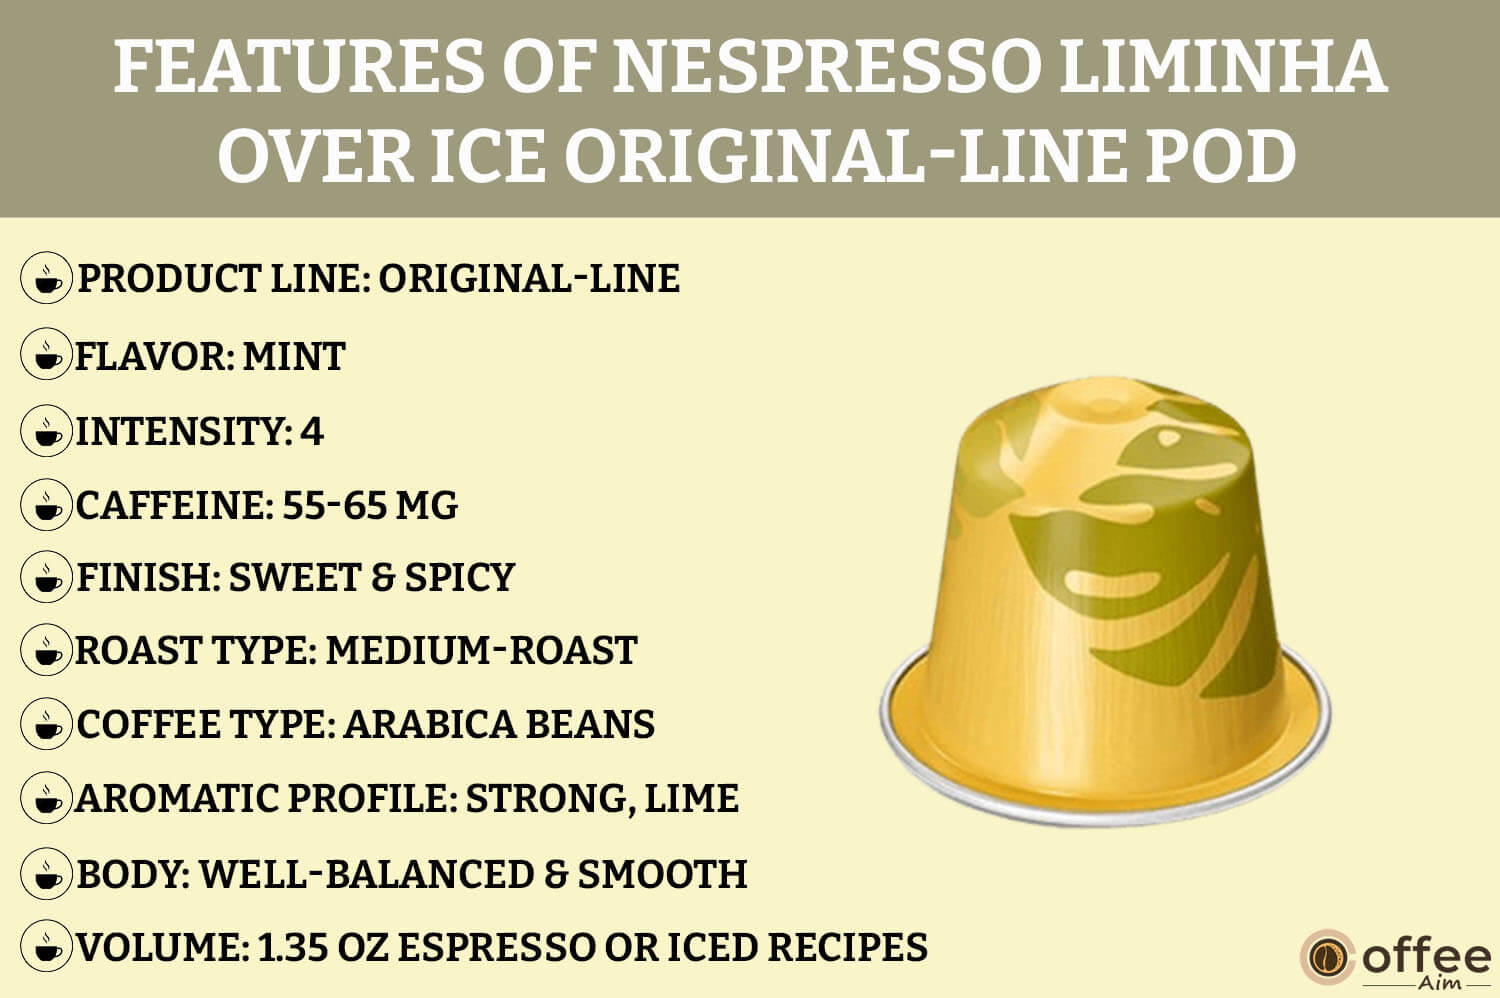 The image details the features of the Nespresso Liminha Over Ice Original-Line Pod for our comprehensive review article.